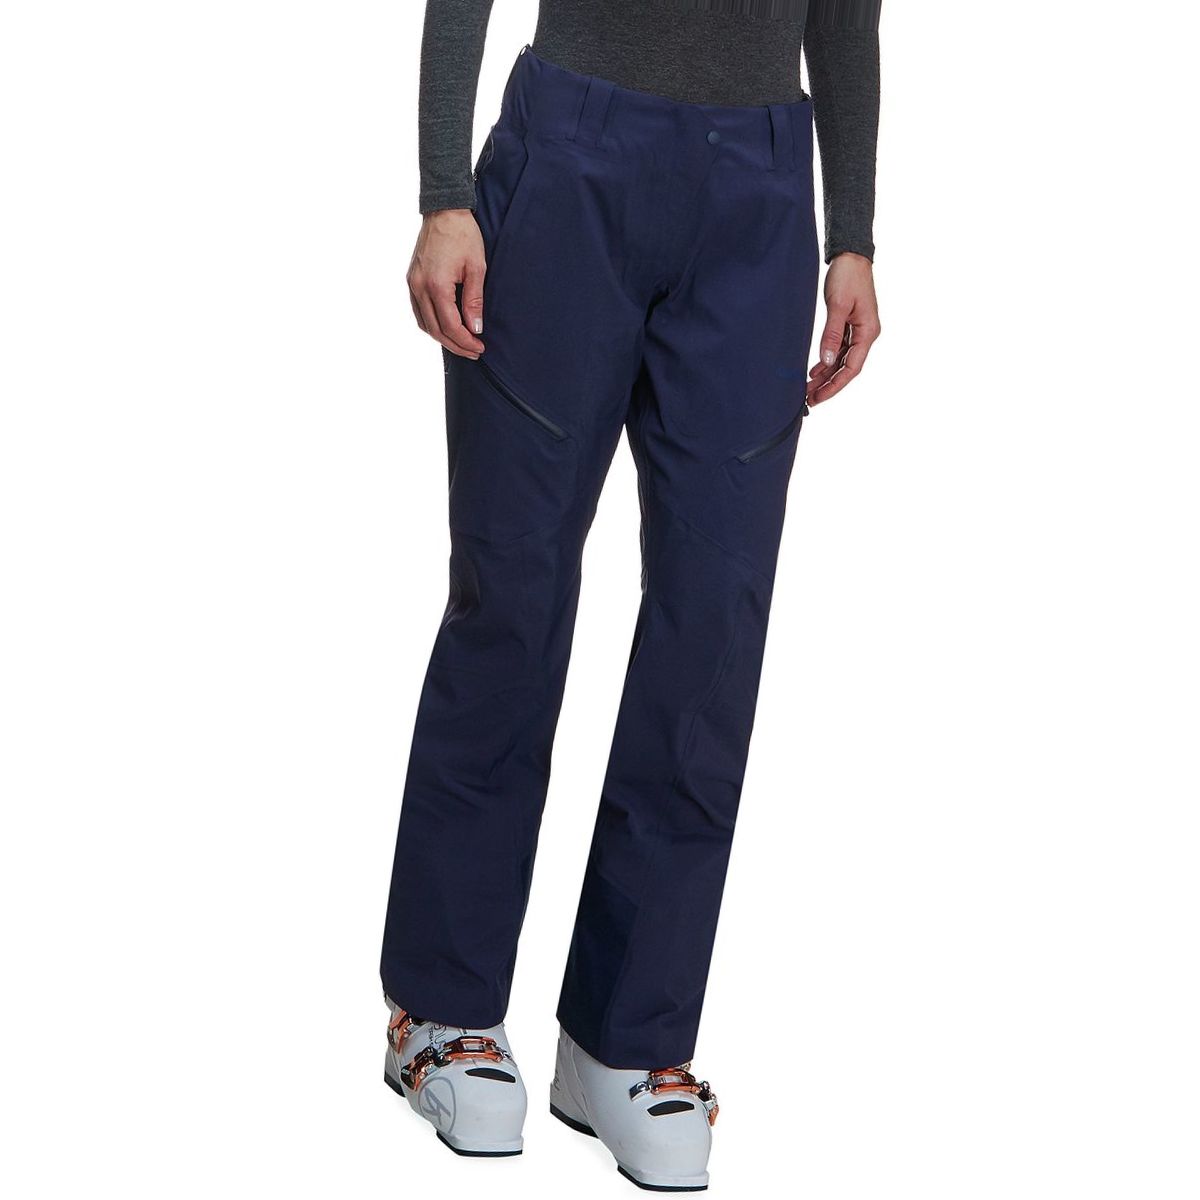 Patagonia Untracked Pant - Women's